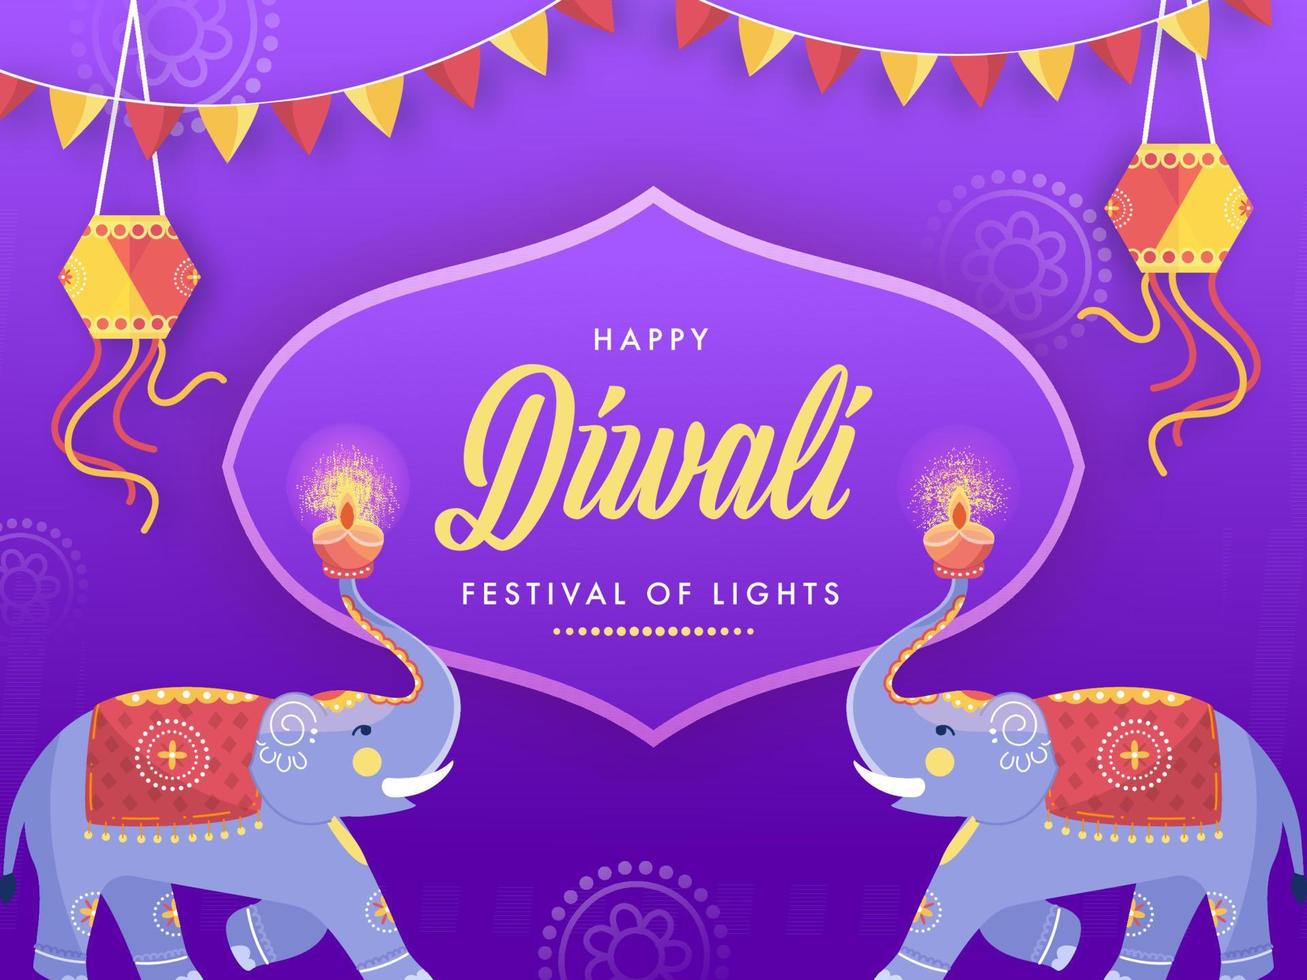 Happy Diwali Festival Of Lights Text on Vintage Frame with Cartoon Elephants Holding Lit Oil Lamps and Hanging Lanterns Decorated Purple Background. vector